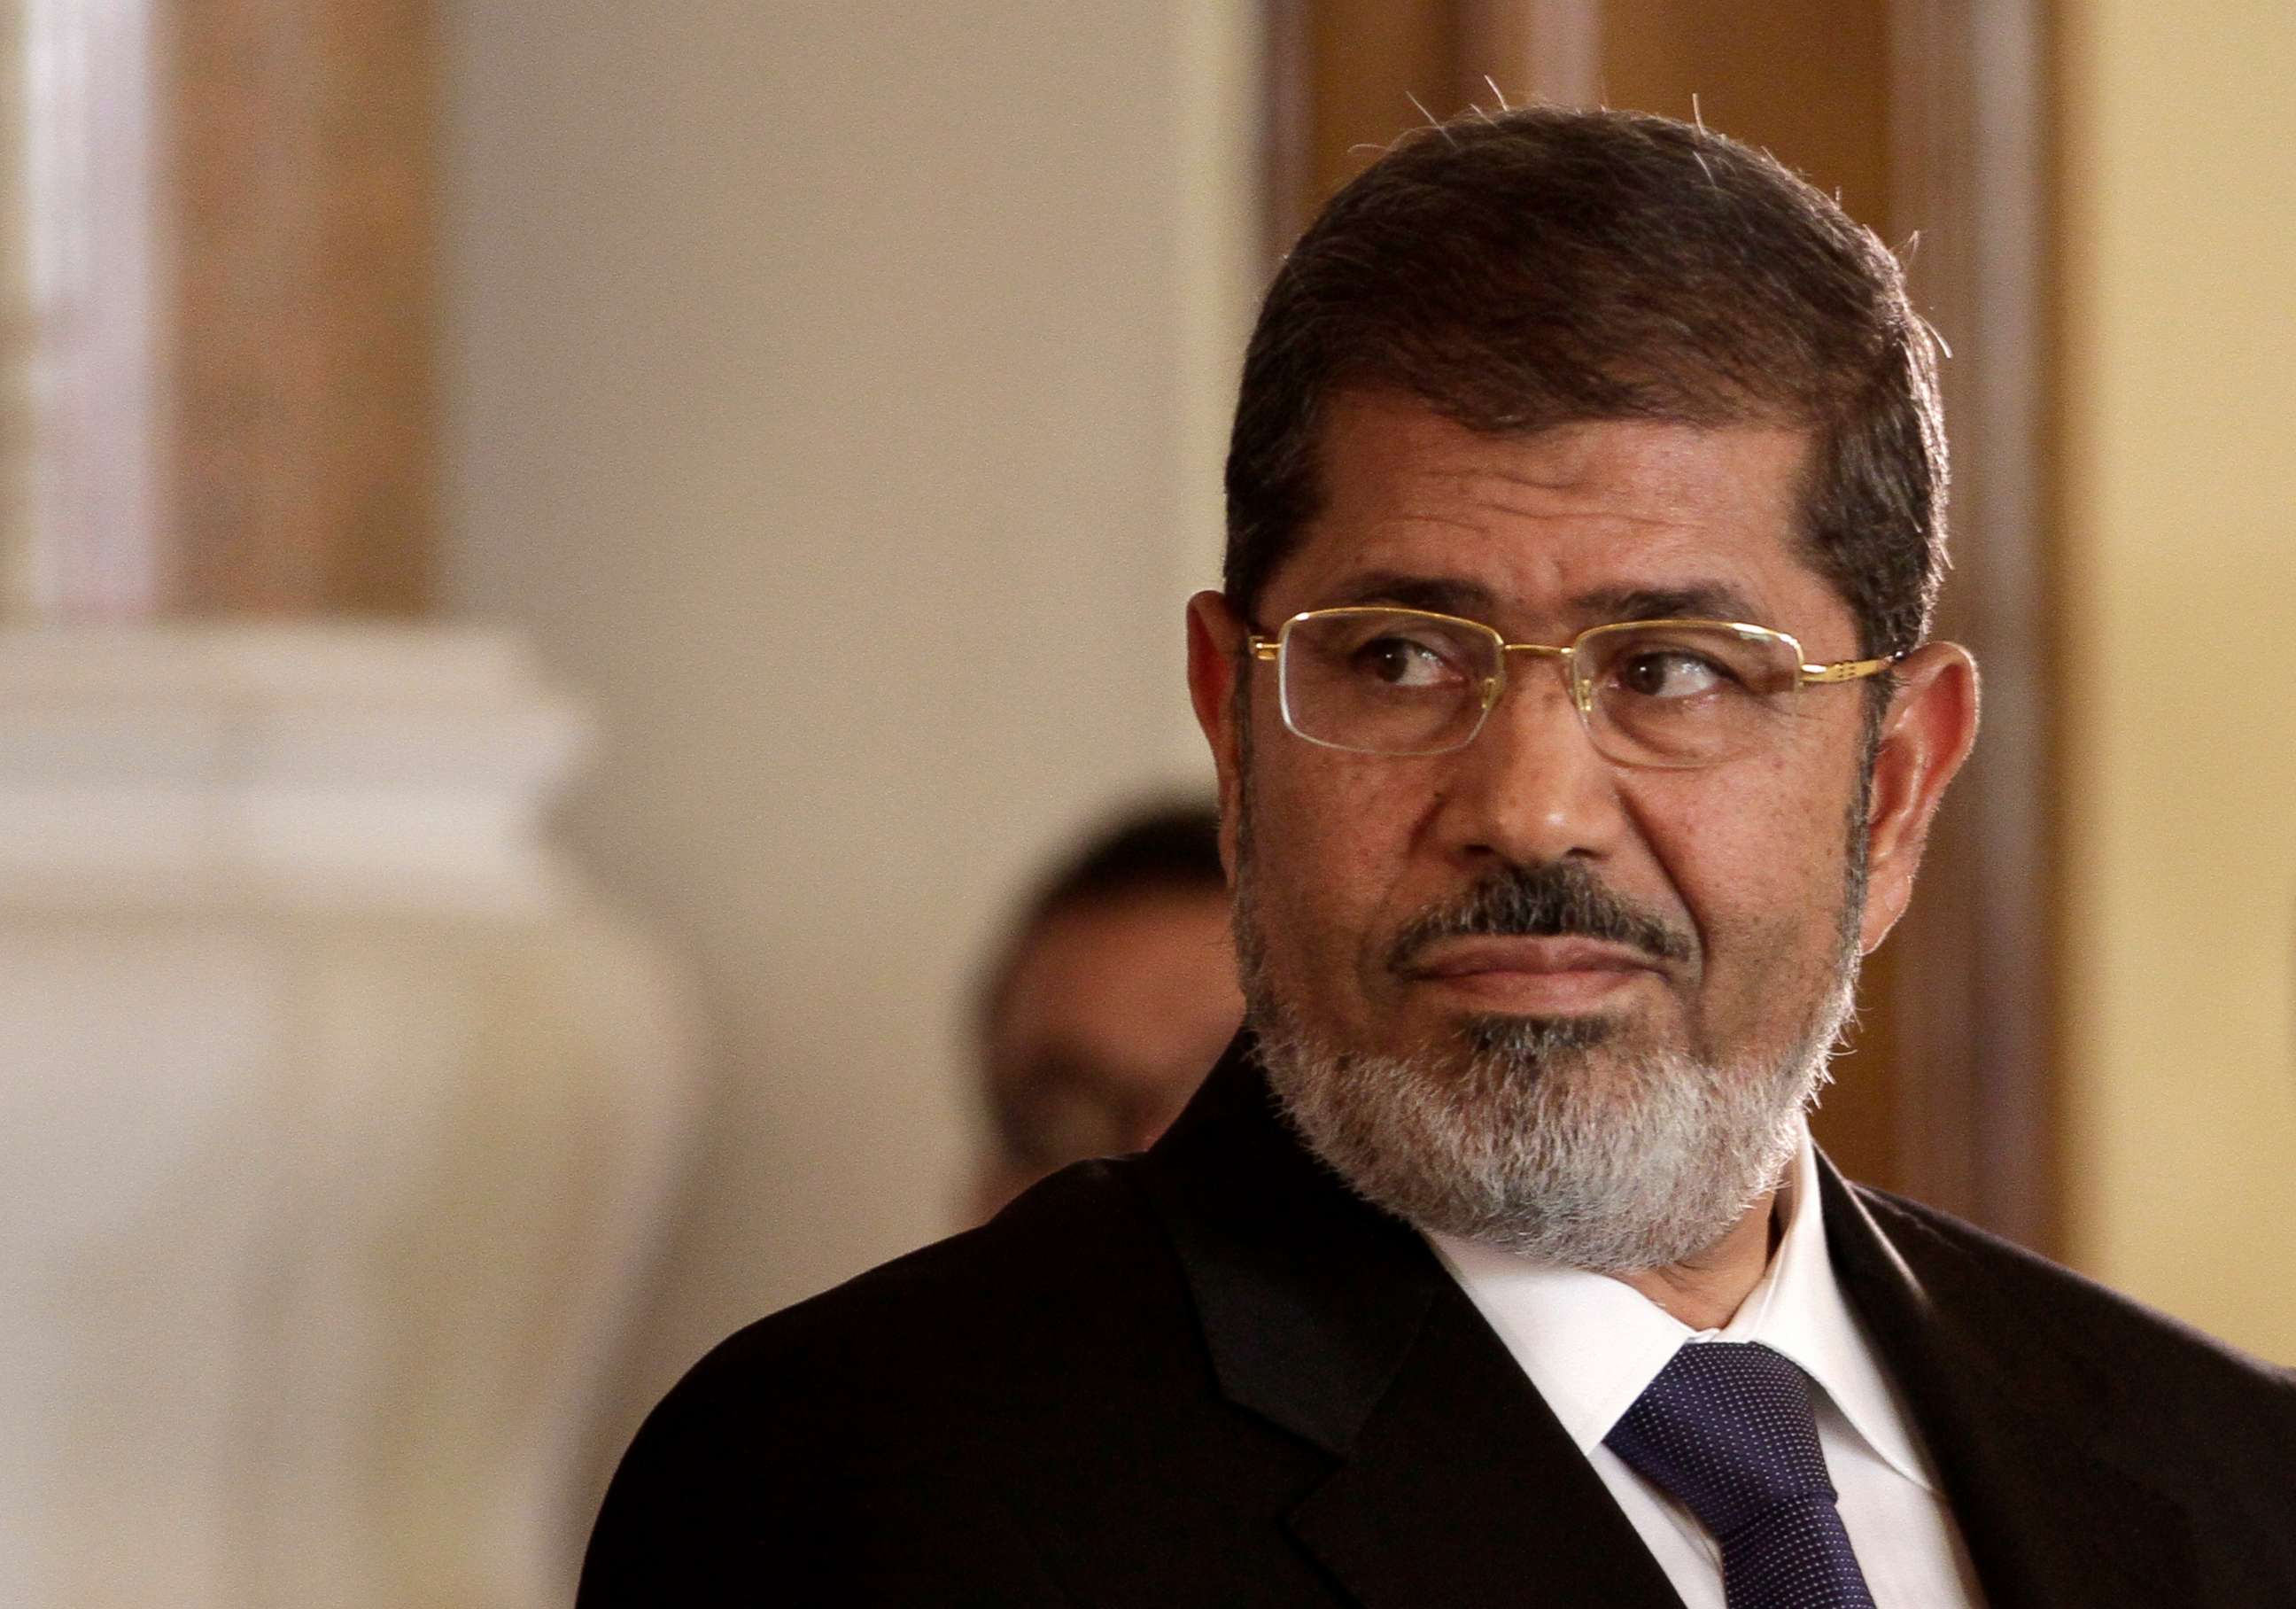 PHOTO: Egyptian President Mohammed Morsi holds a news conference with Tunisian President Moncef Marzouki, at the Presidential palace in Cairo, Egypt, July 13, 2012.